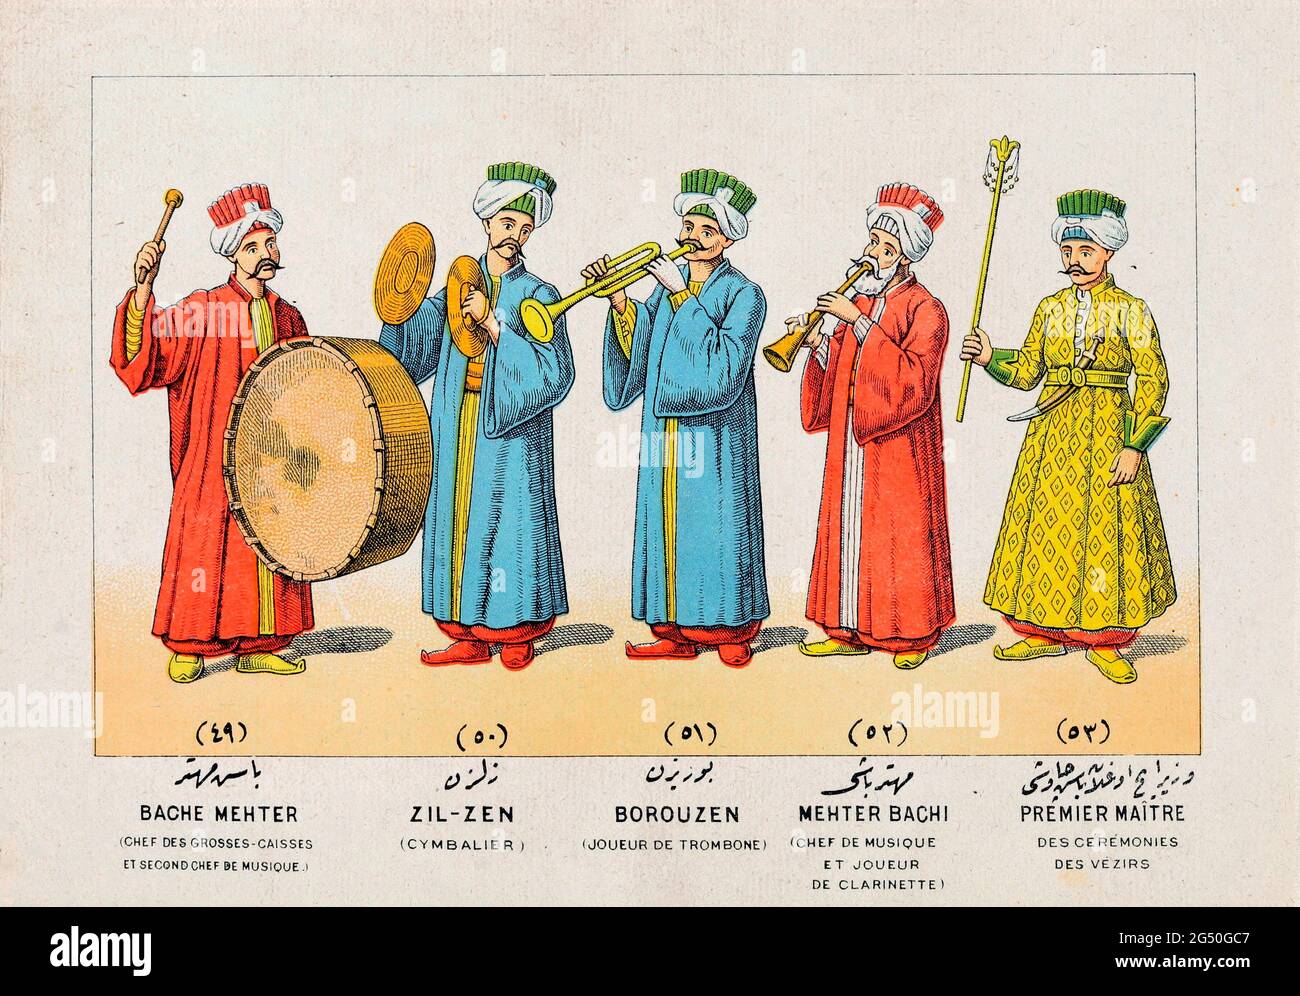 Illustrated history of Turkish Army (Ottoman Empire).  Bache Mehter (bass conductor and second music conductor). Zil-zen (cymbal). Borouzen (trombone Stock Photo